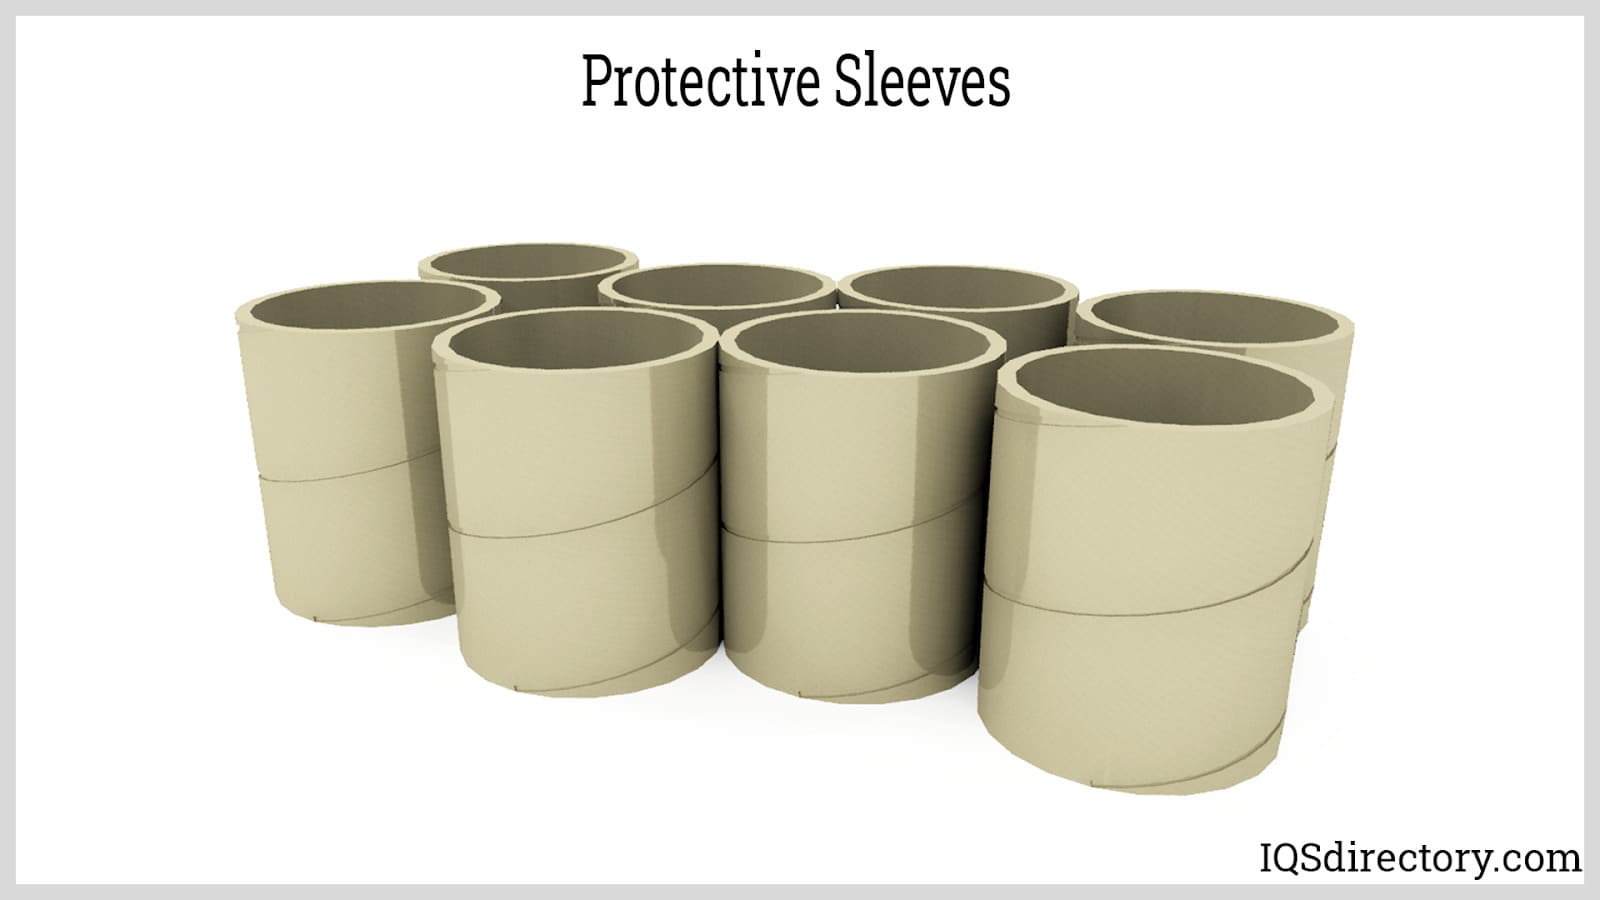 Protective Sleeves for Threads